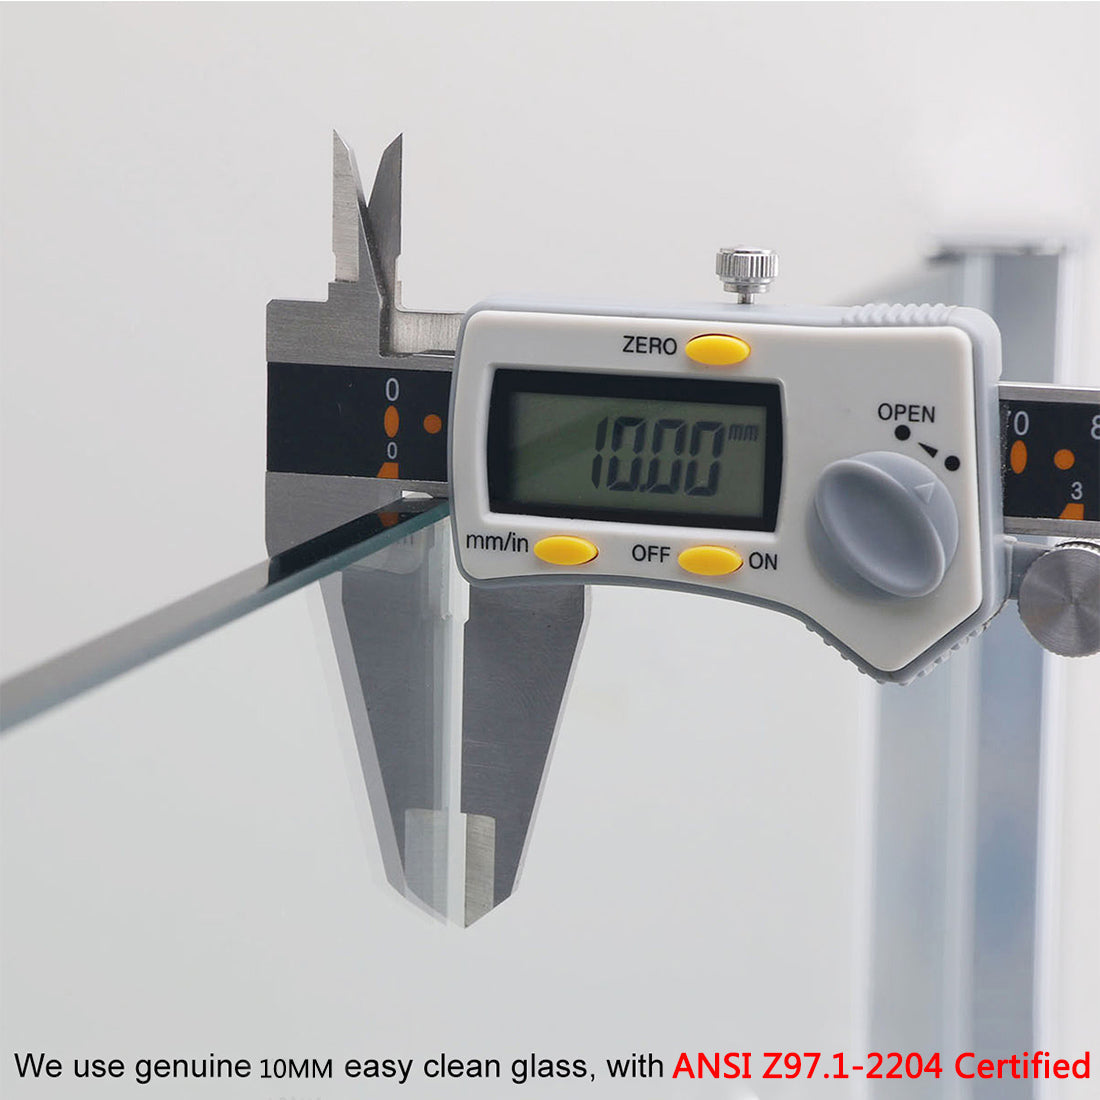 3/8 inch (10mm) thickness glass- ANSI Z97.1 certified, not shatter and easy to clean, you can get on with your showering comfortably and safely.